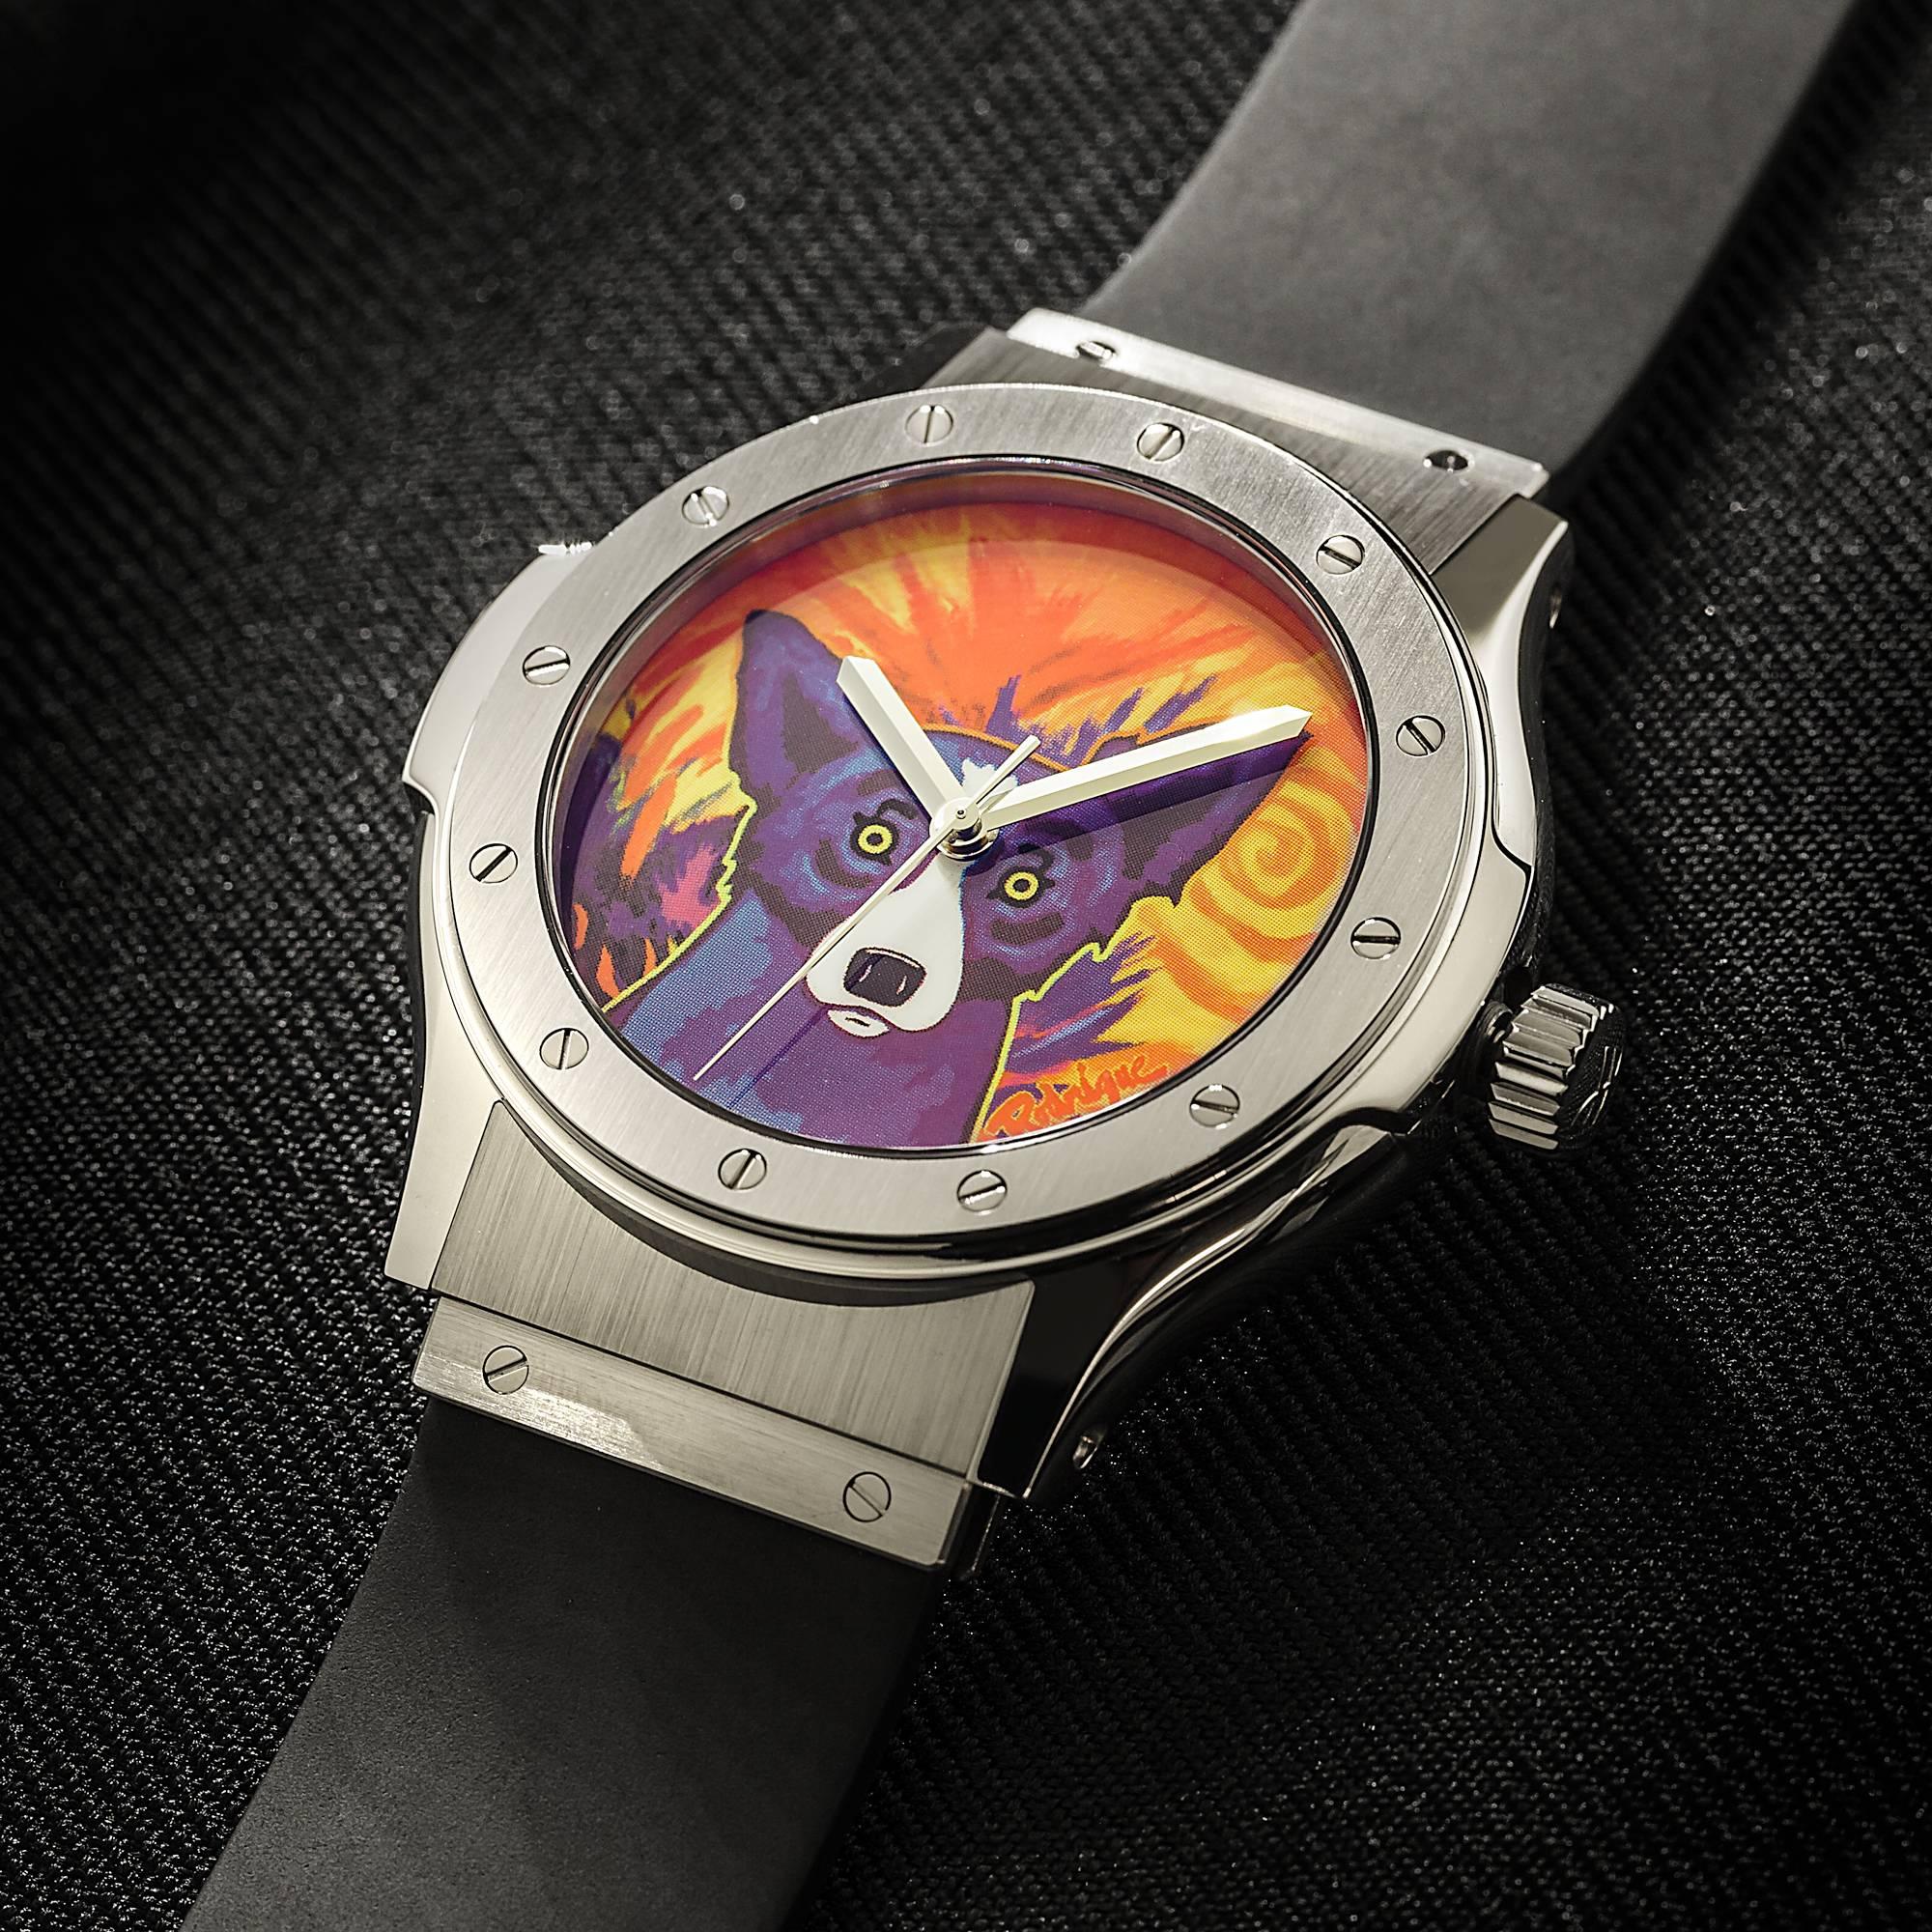 Made in partnership with Hublot, this timepiece celebrates Louisiana-born artist George Rodrigue. He is best known for his Blue Dog Series from the 1990's, which was inspired by the French Cajun myth of the loup-garou, or werewolf. This is one of